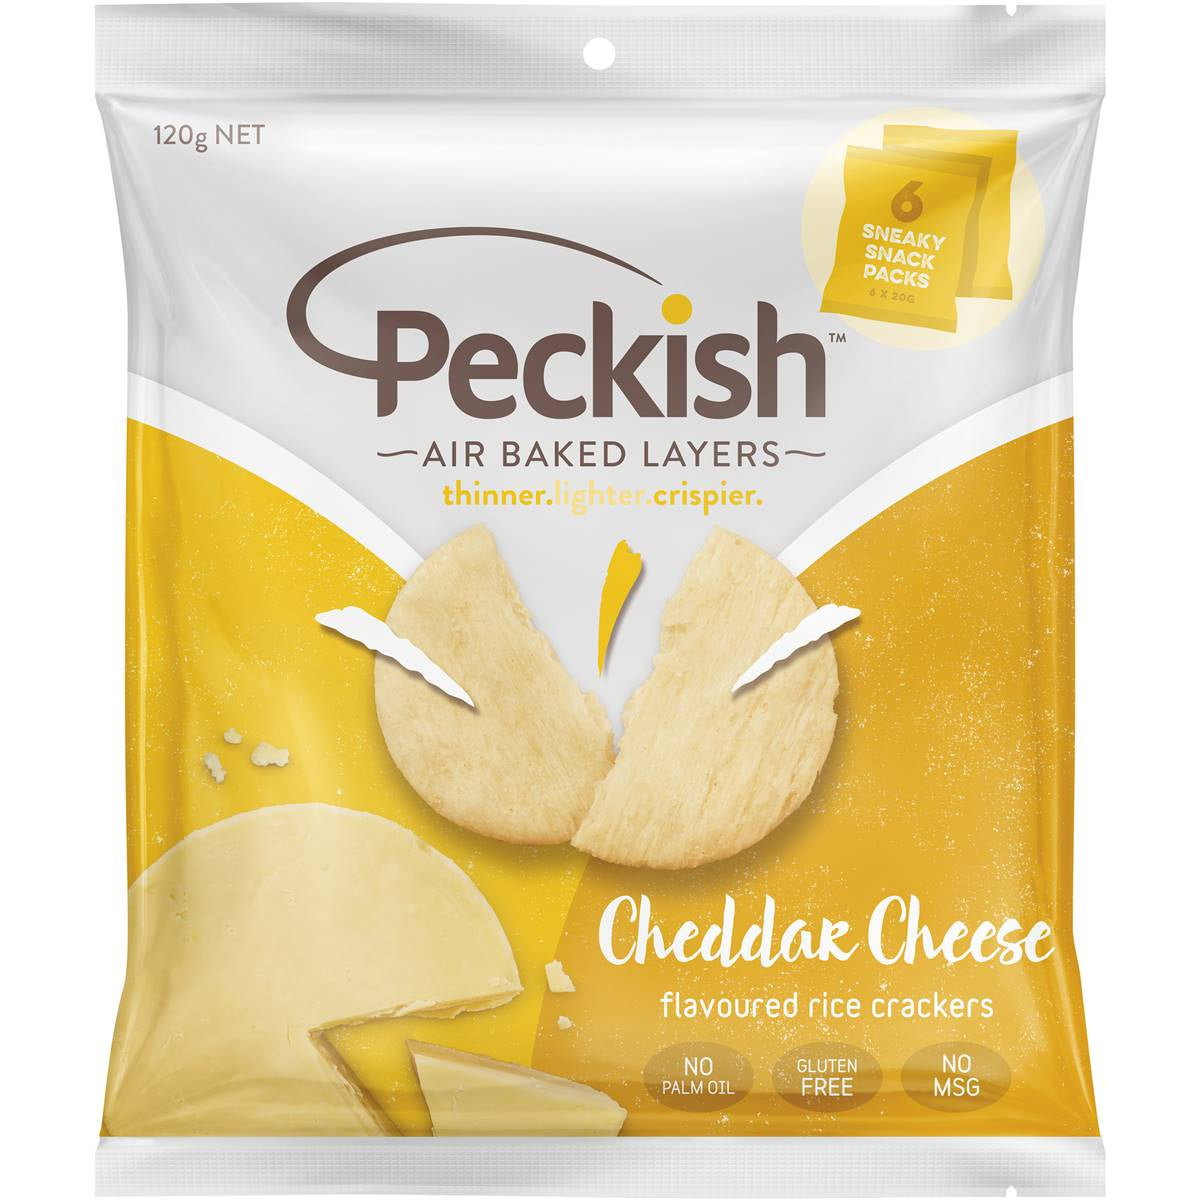 Peckish Rice Crackers Cheddar Cheese 6pk